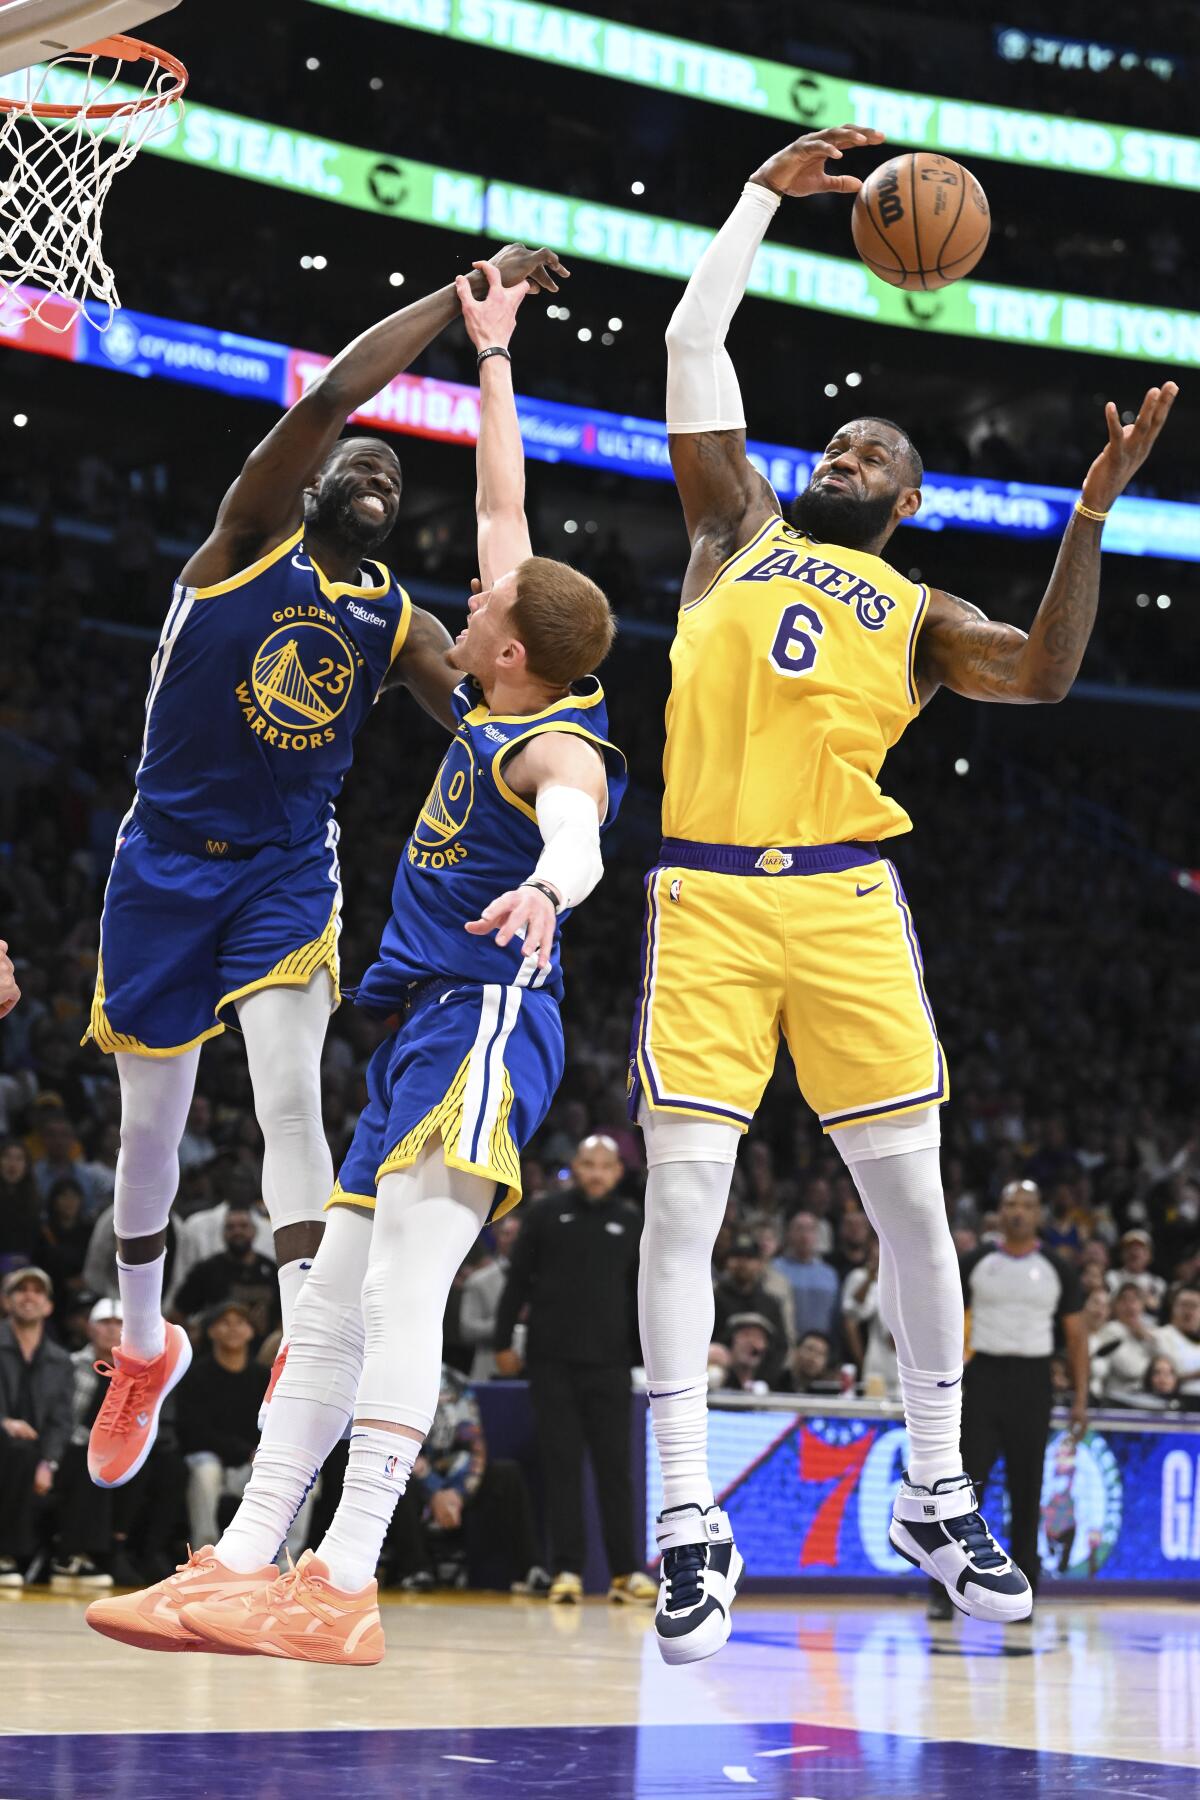 Lakers forward LeBron James, from right, jumps up for a rebound against the Warriors' Donte DiVincenzo and Draymond Green.